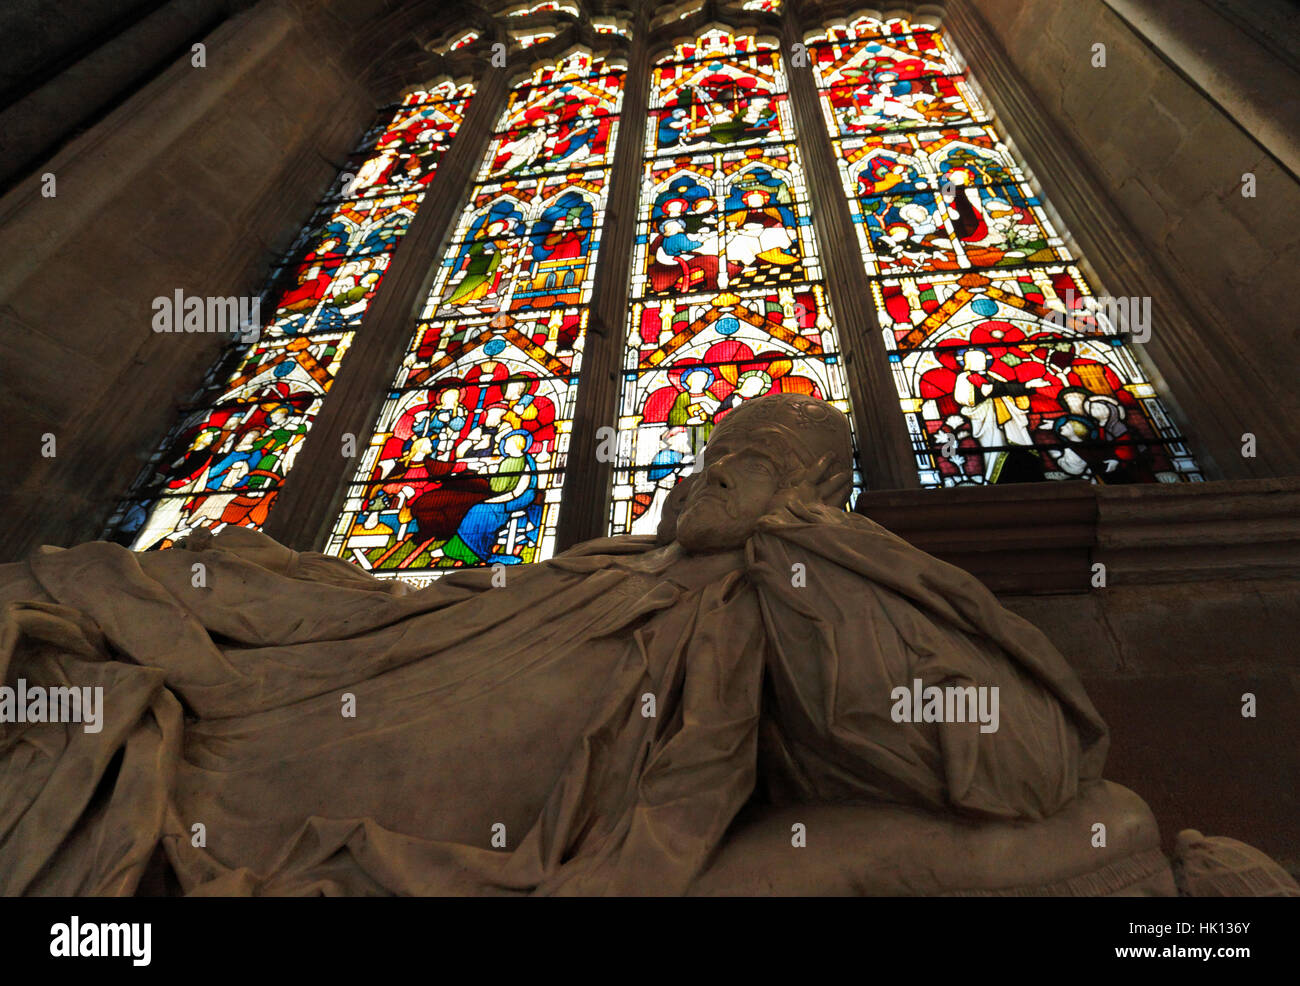 The tomb of Bishop Peter Gunning at Ely cathedral, Ely, UK. Stock Photo